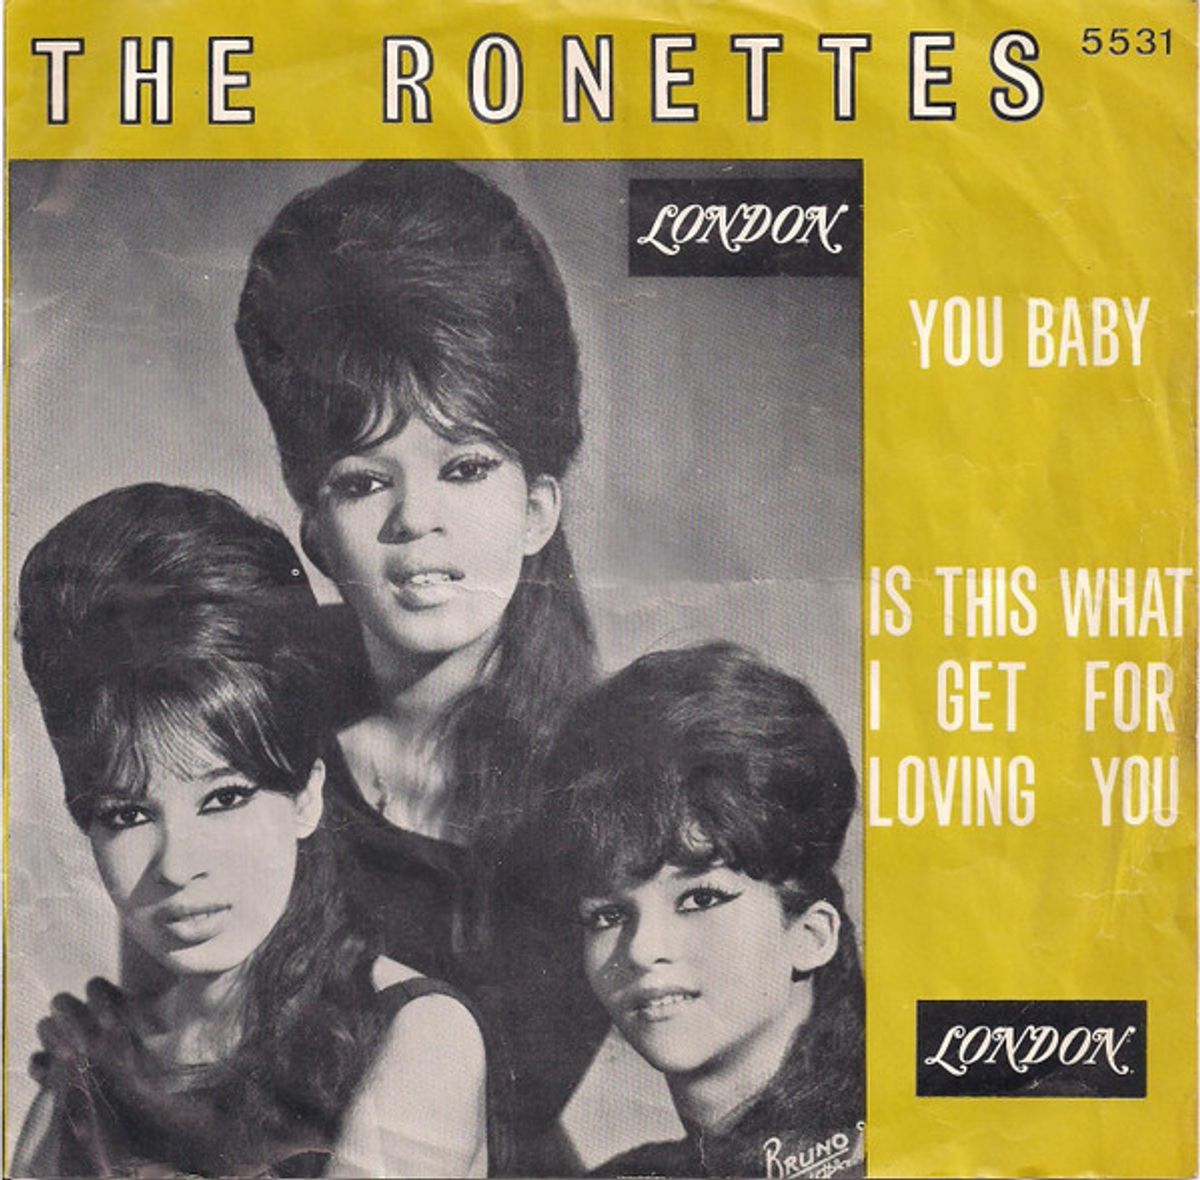 #VivaCaroleKing - The Ronettes - Is This What I Get For Loving You? (1965)